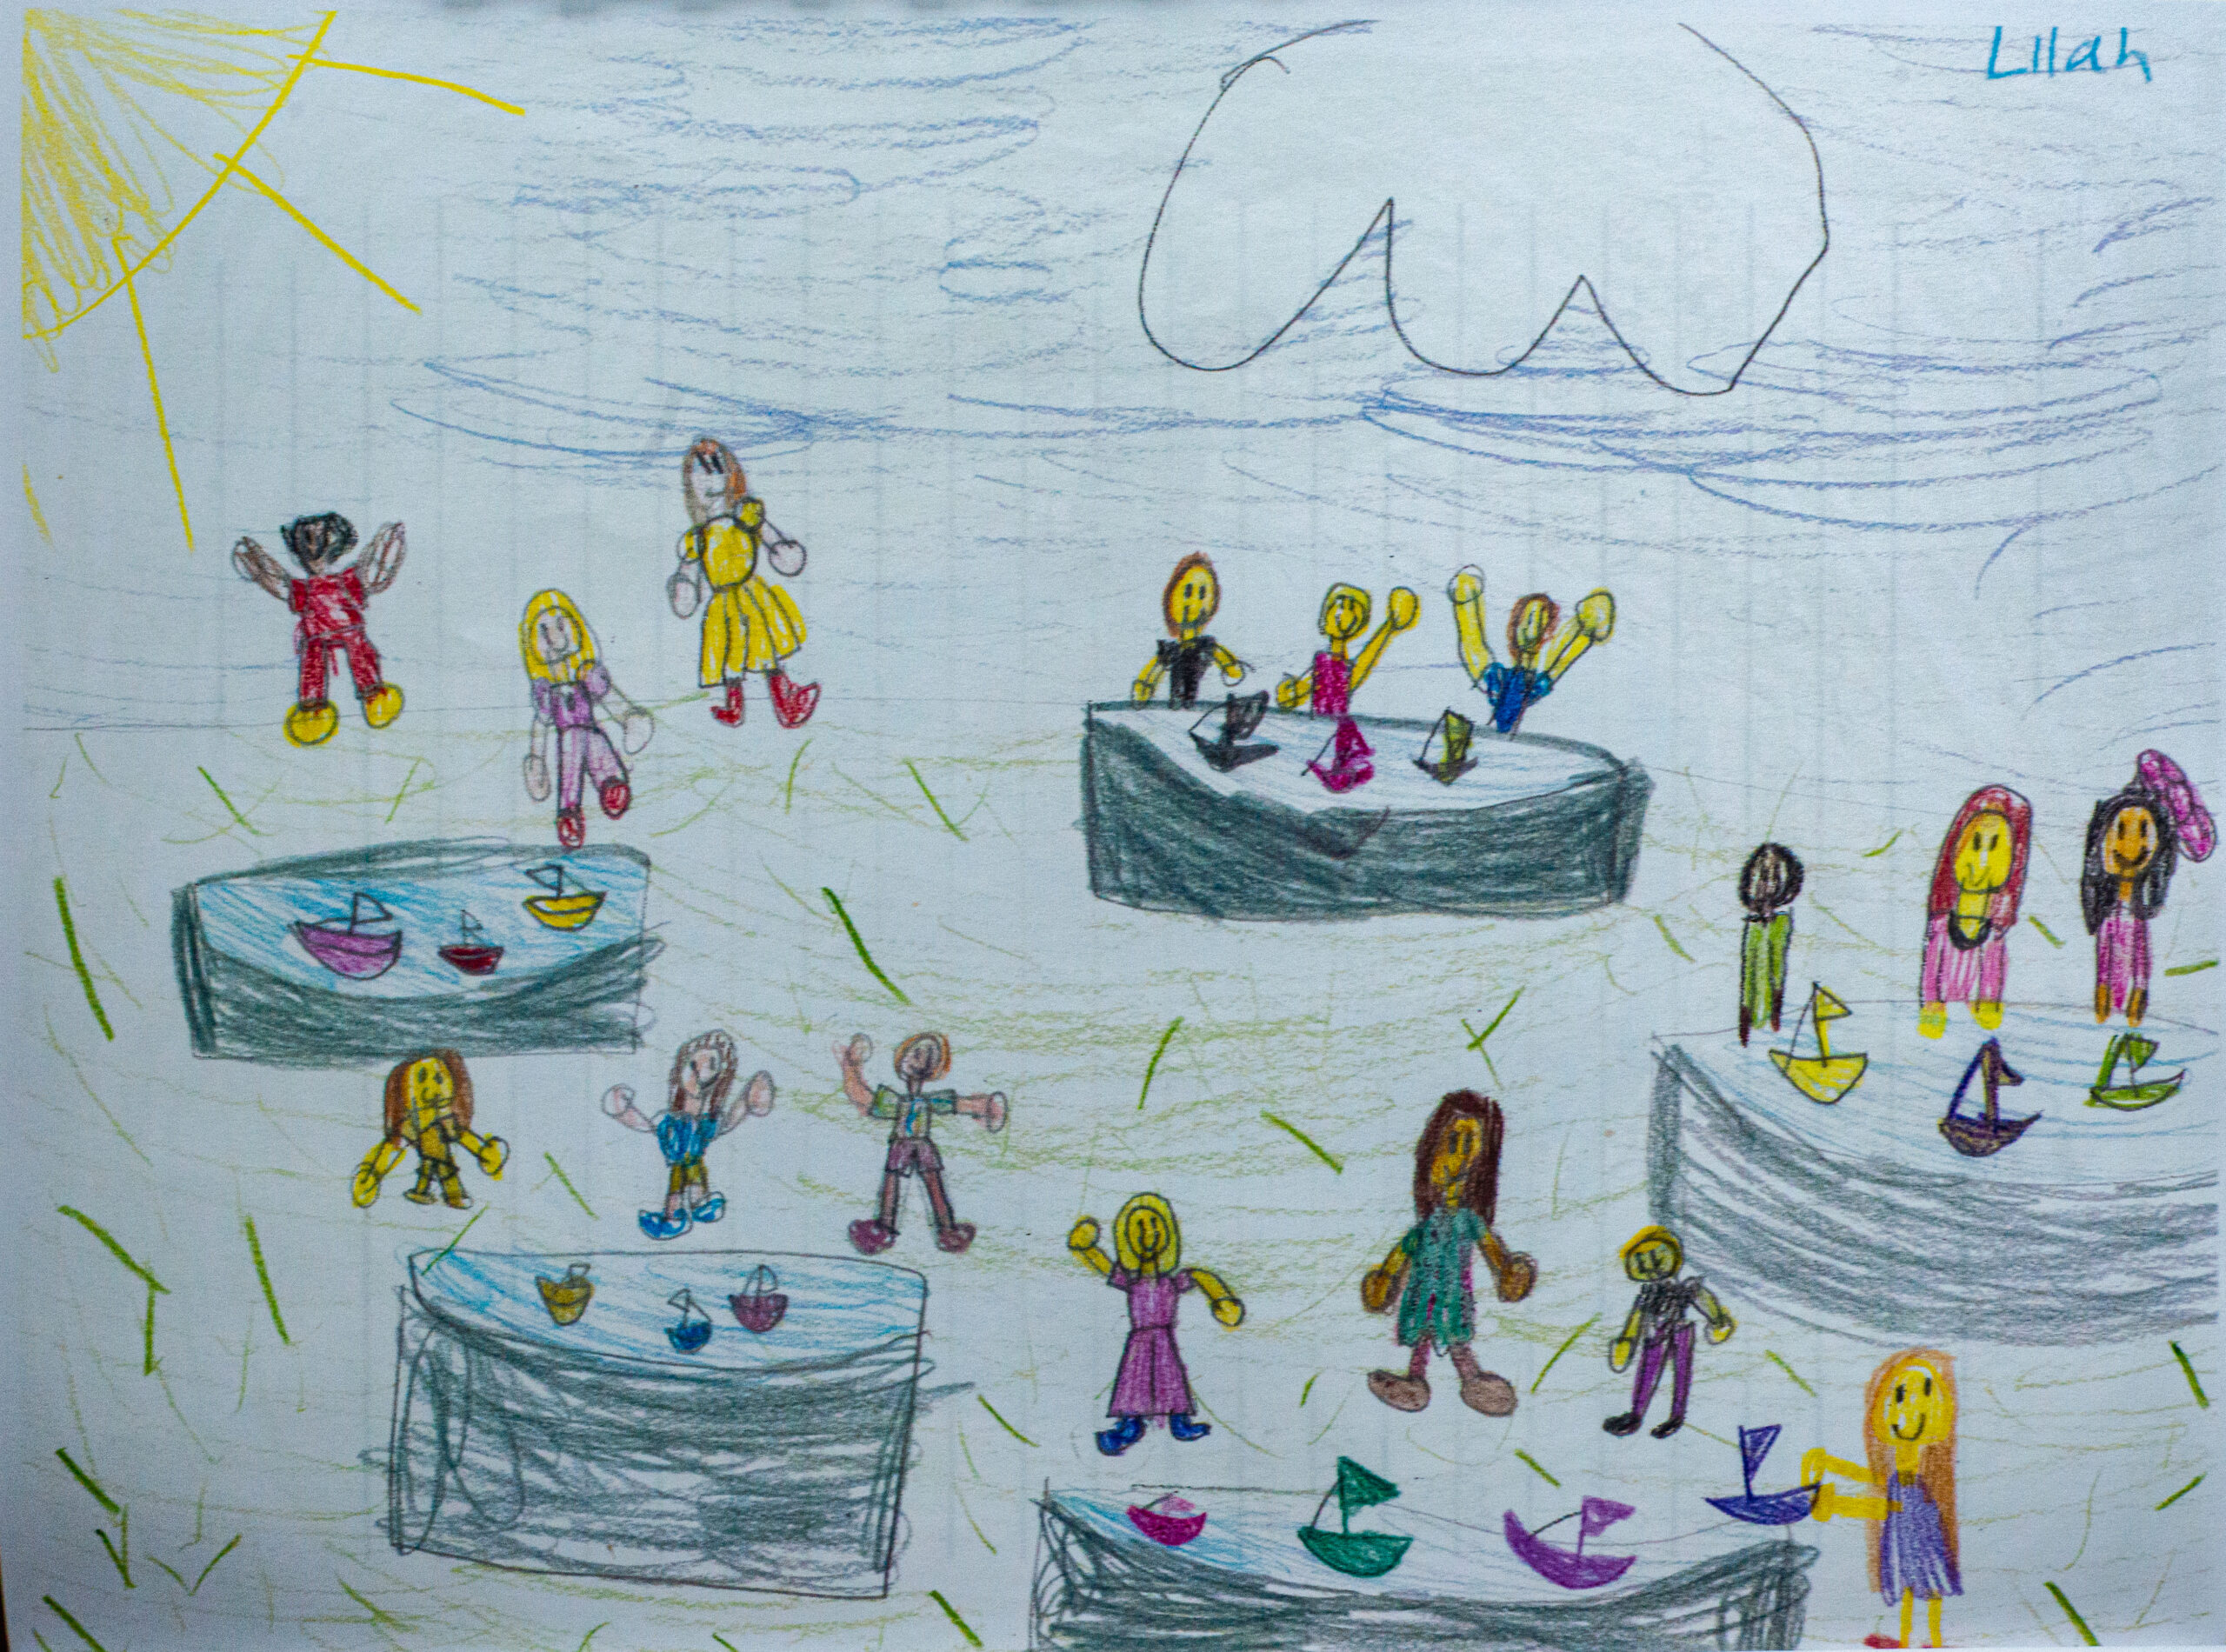 Students at Sag Harbor Elementary School wrote thank you notes to the East End Classic Boat Society.